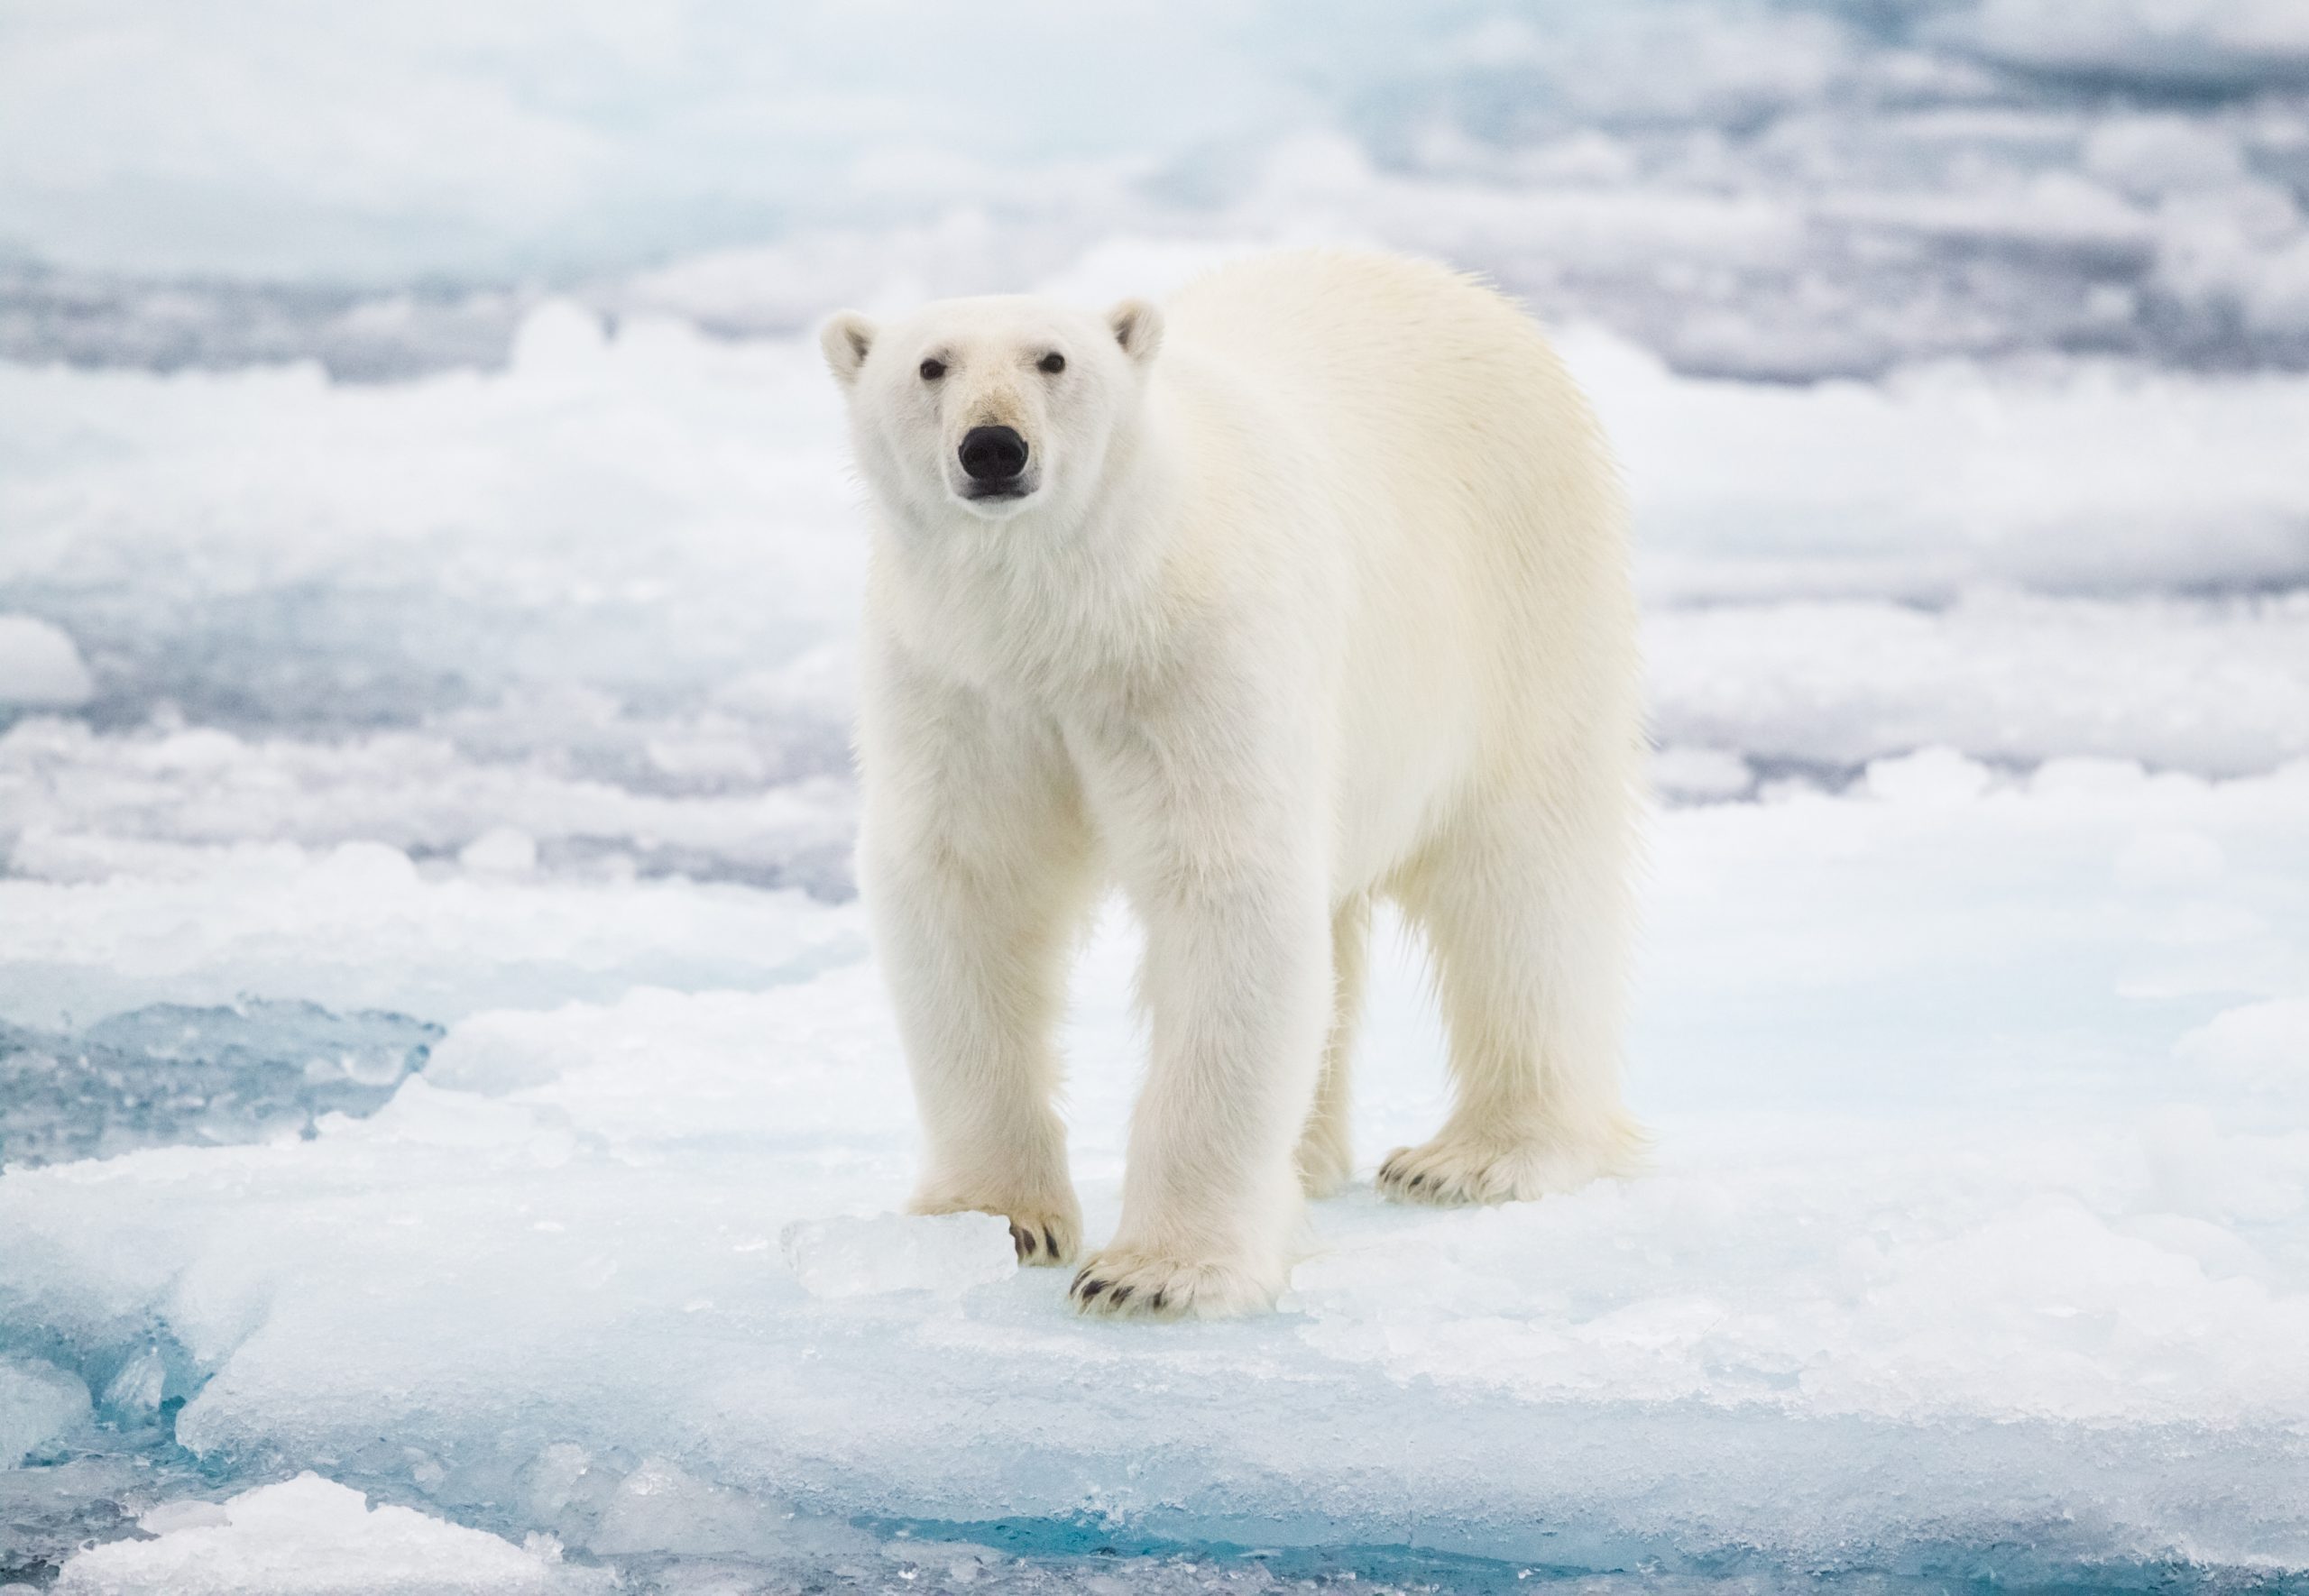 Why Do Polar Bears Need Ice to Survive? | Reader's Digest